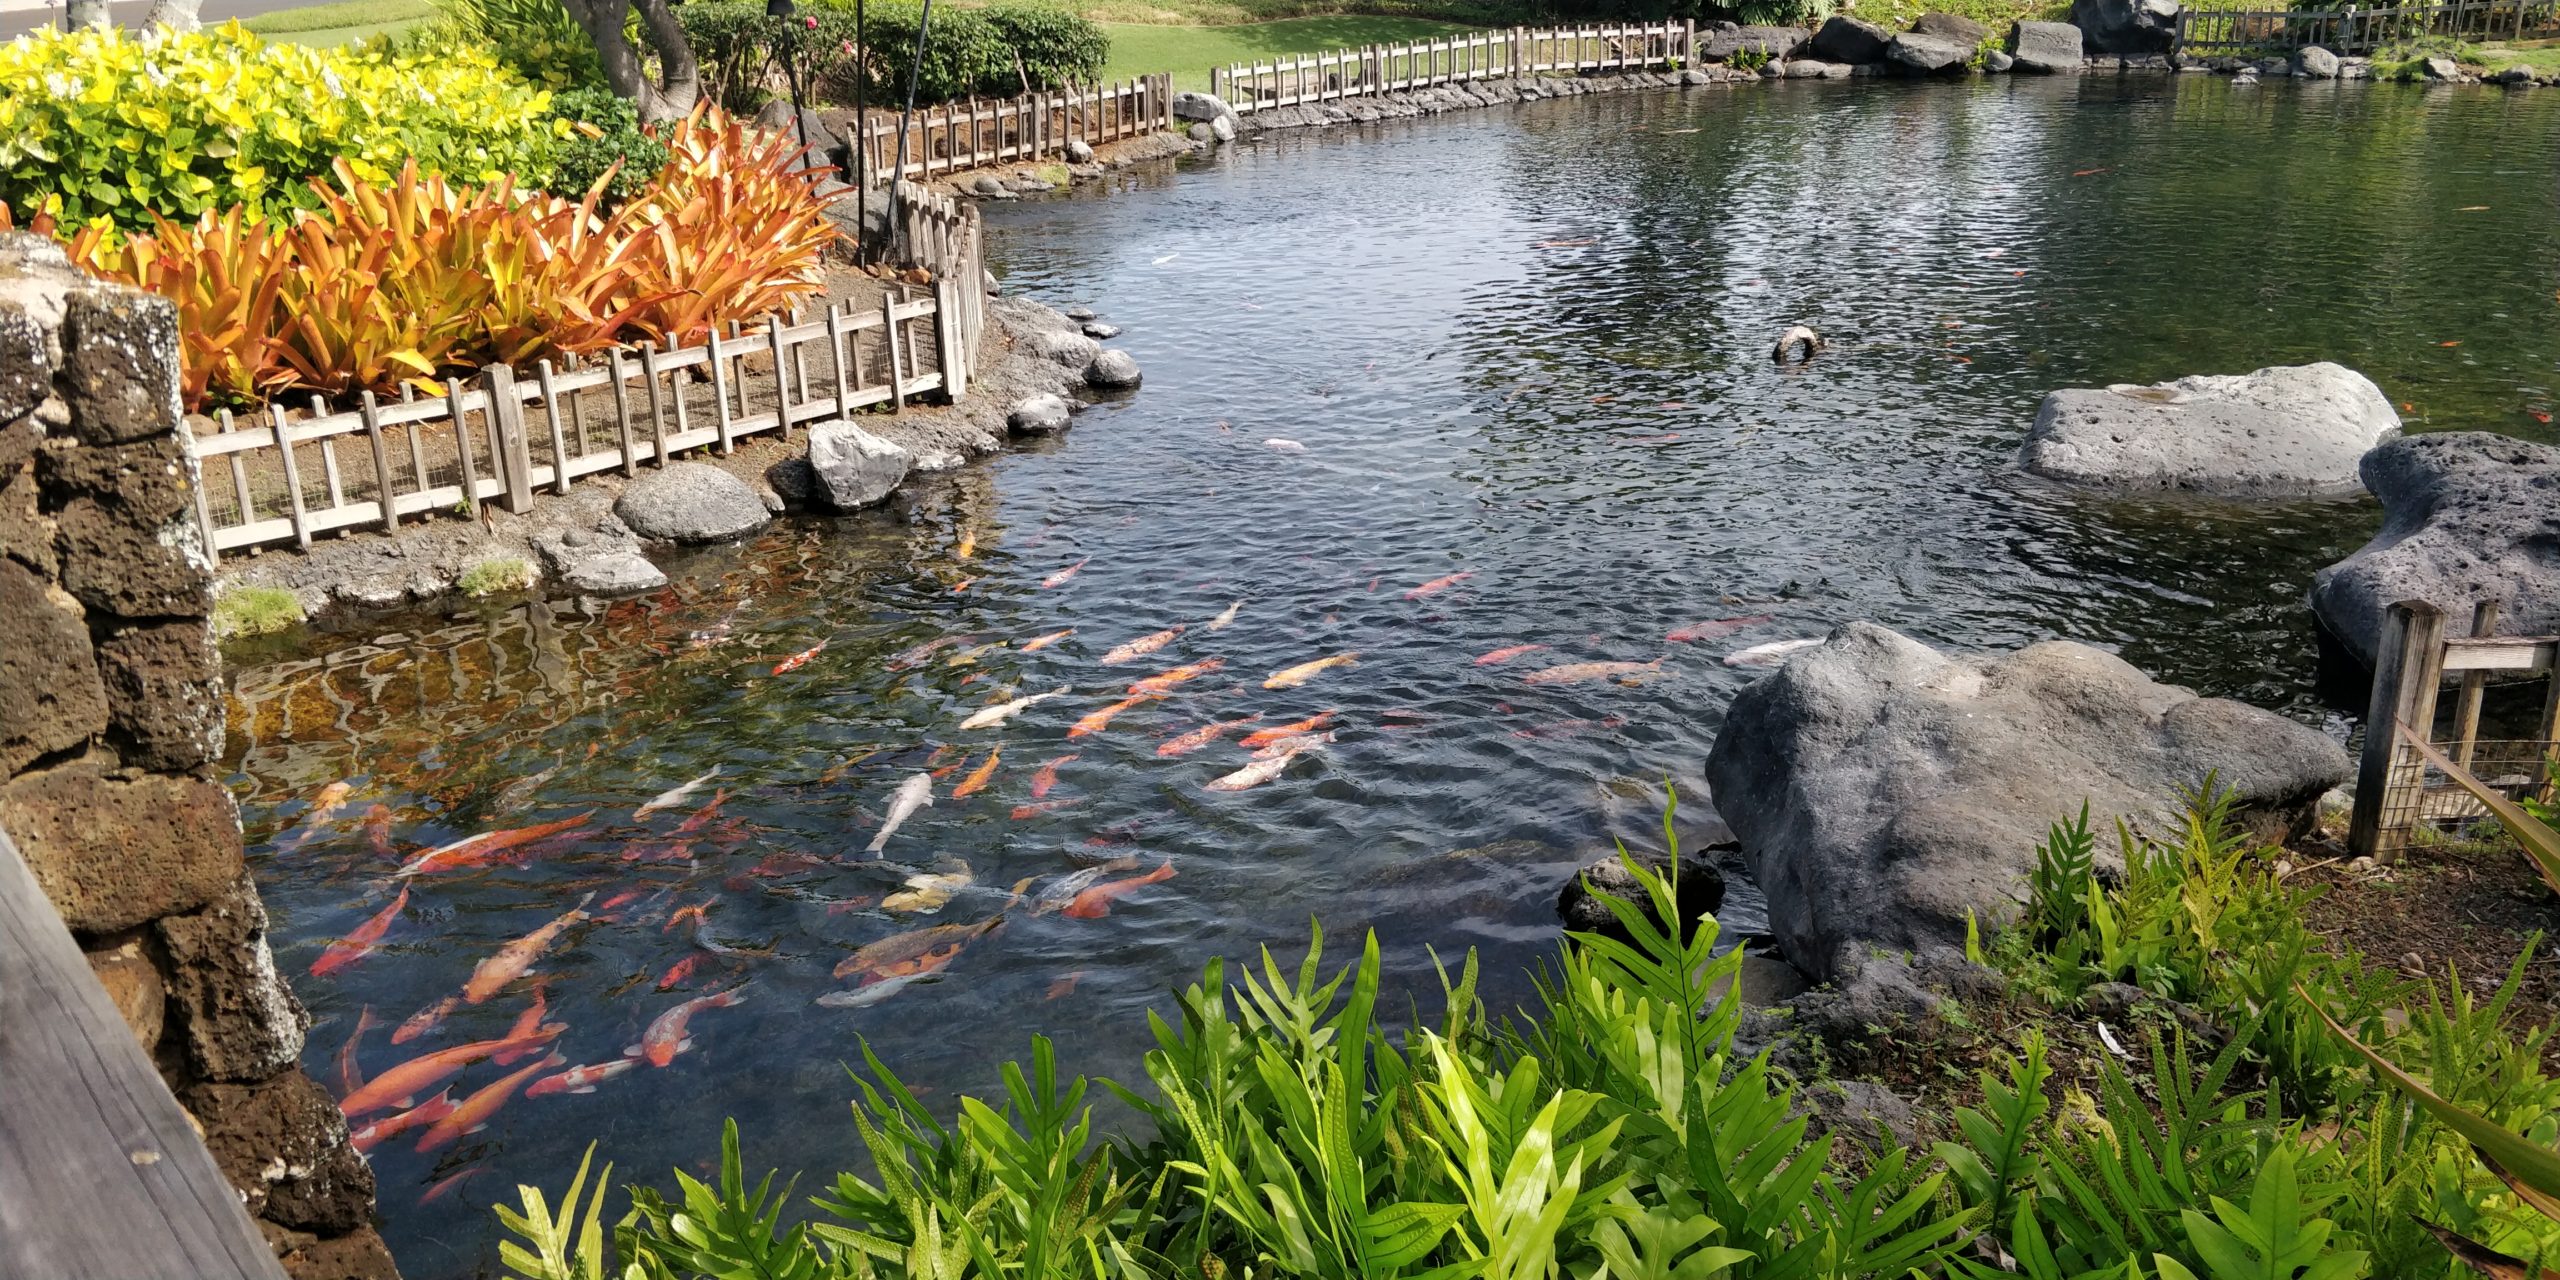 A PICTURE OF THE POND AT THE ENTRANCE TO THE HOTEL